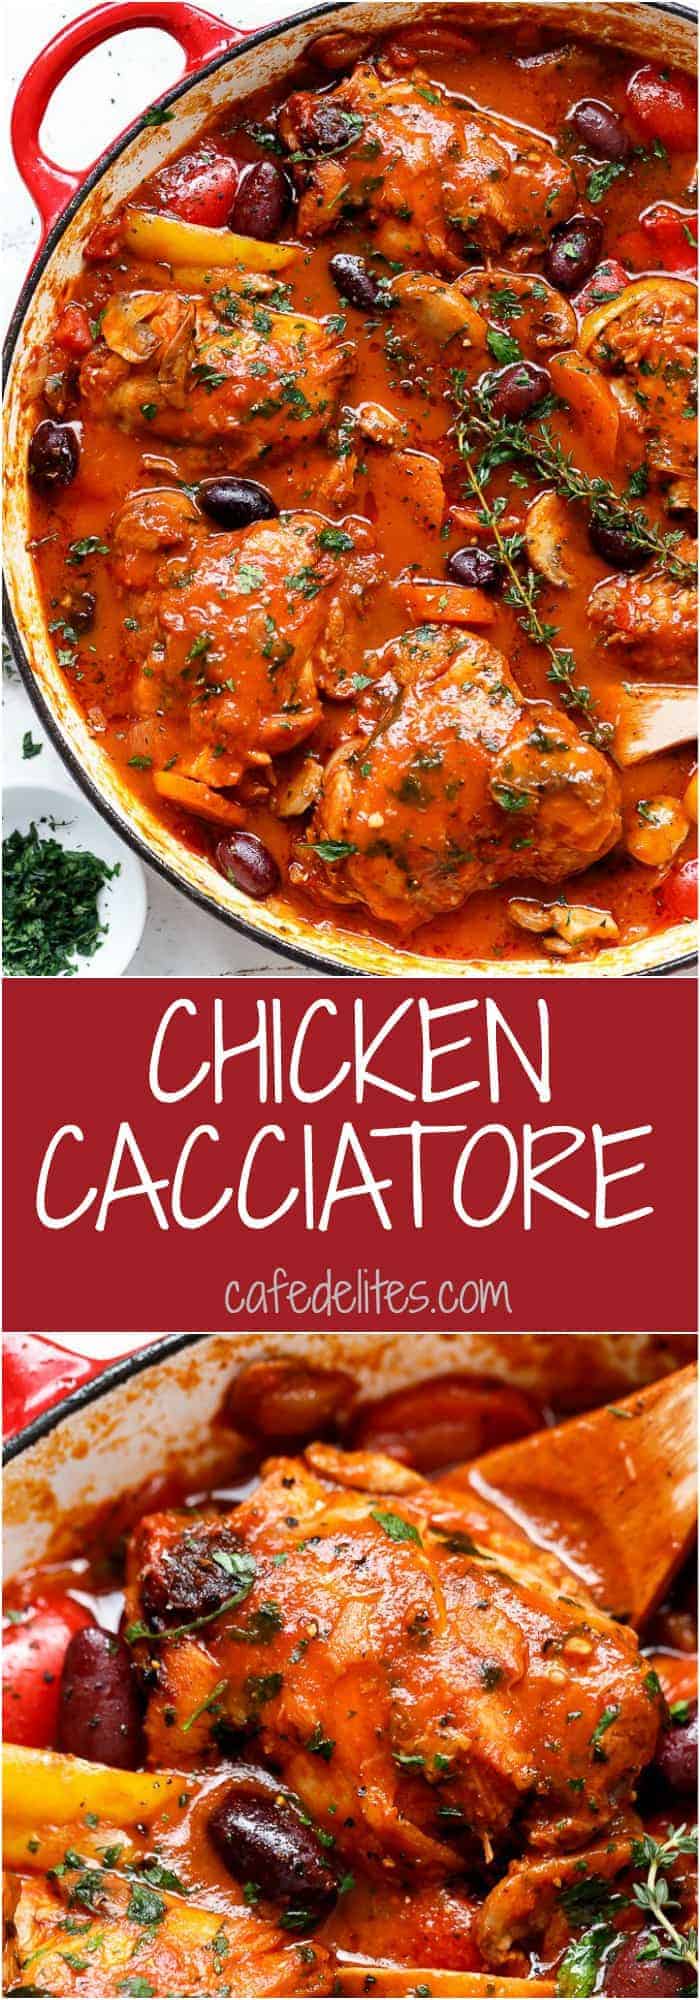 Slow cooked Chicken Cacciatore, with chicken falling off the bone in a rich and rustic sauce is simple Italian comfort food at its best. | https://cafedelites.com